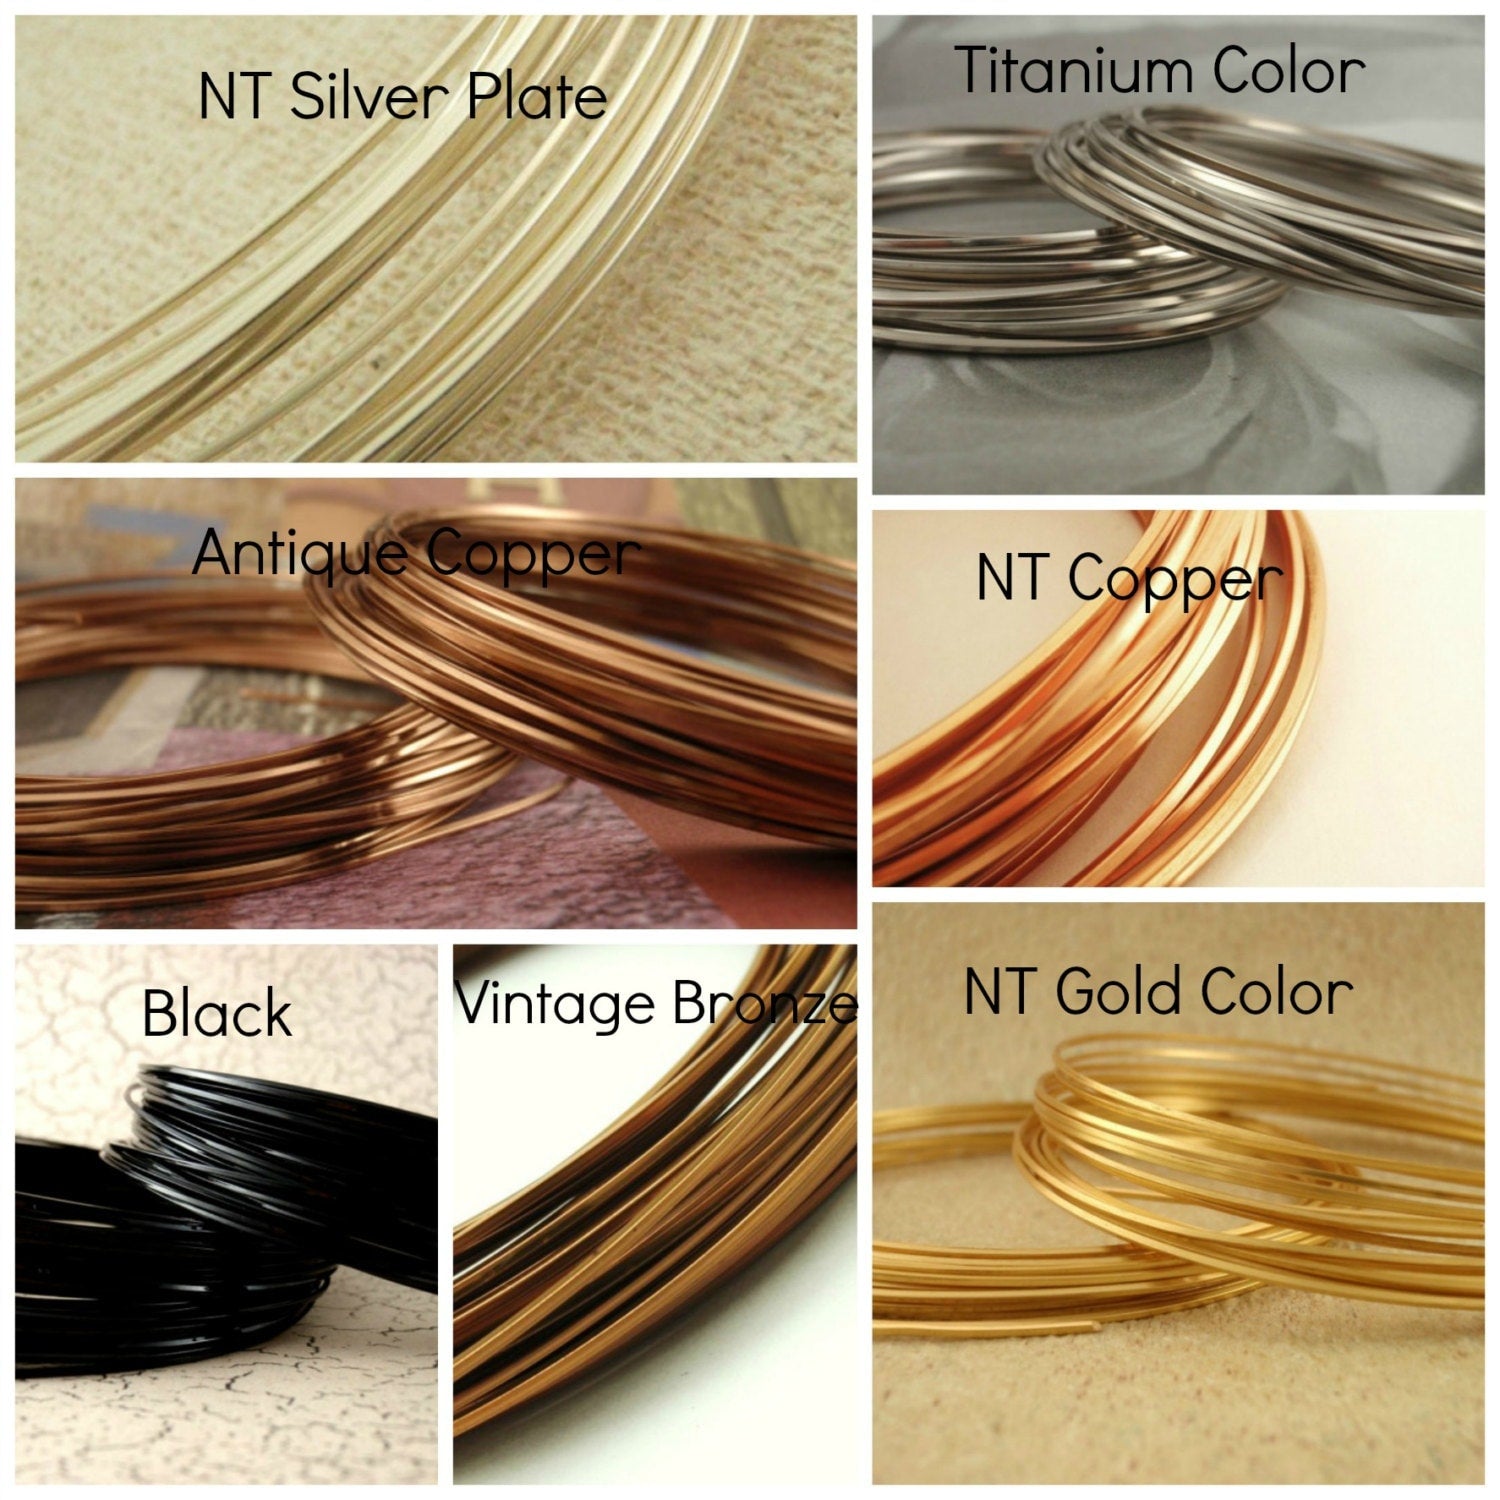 12 Gauge Square Dead Soft Copper Wire - 1 FT: Jewelry Making Supplies, Instructions